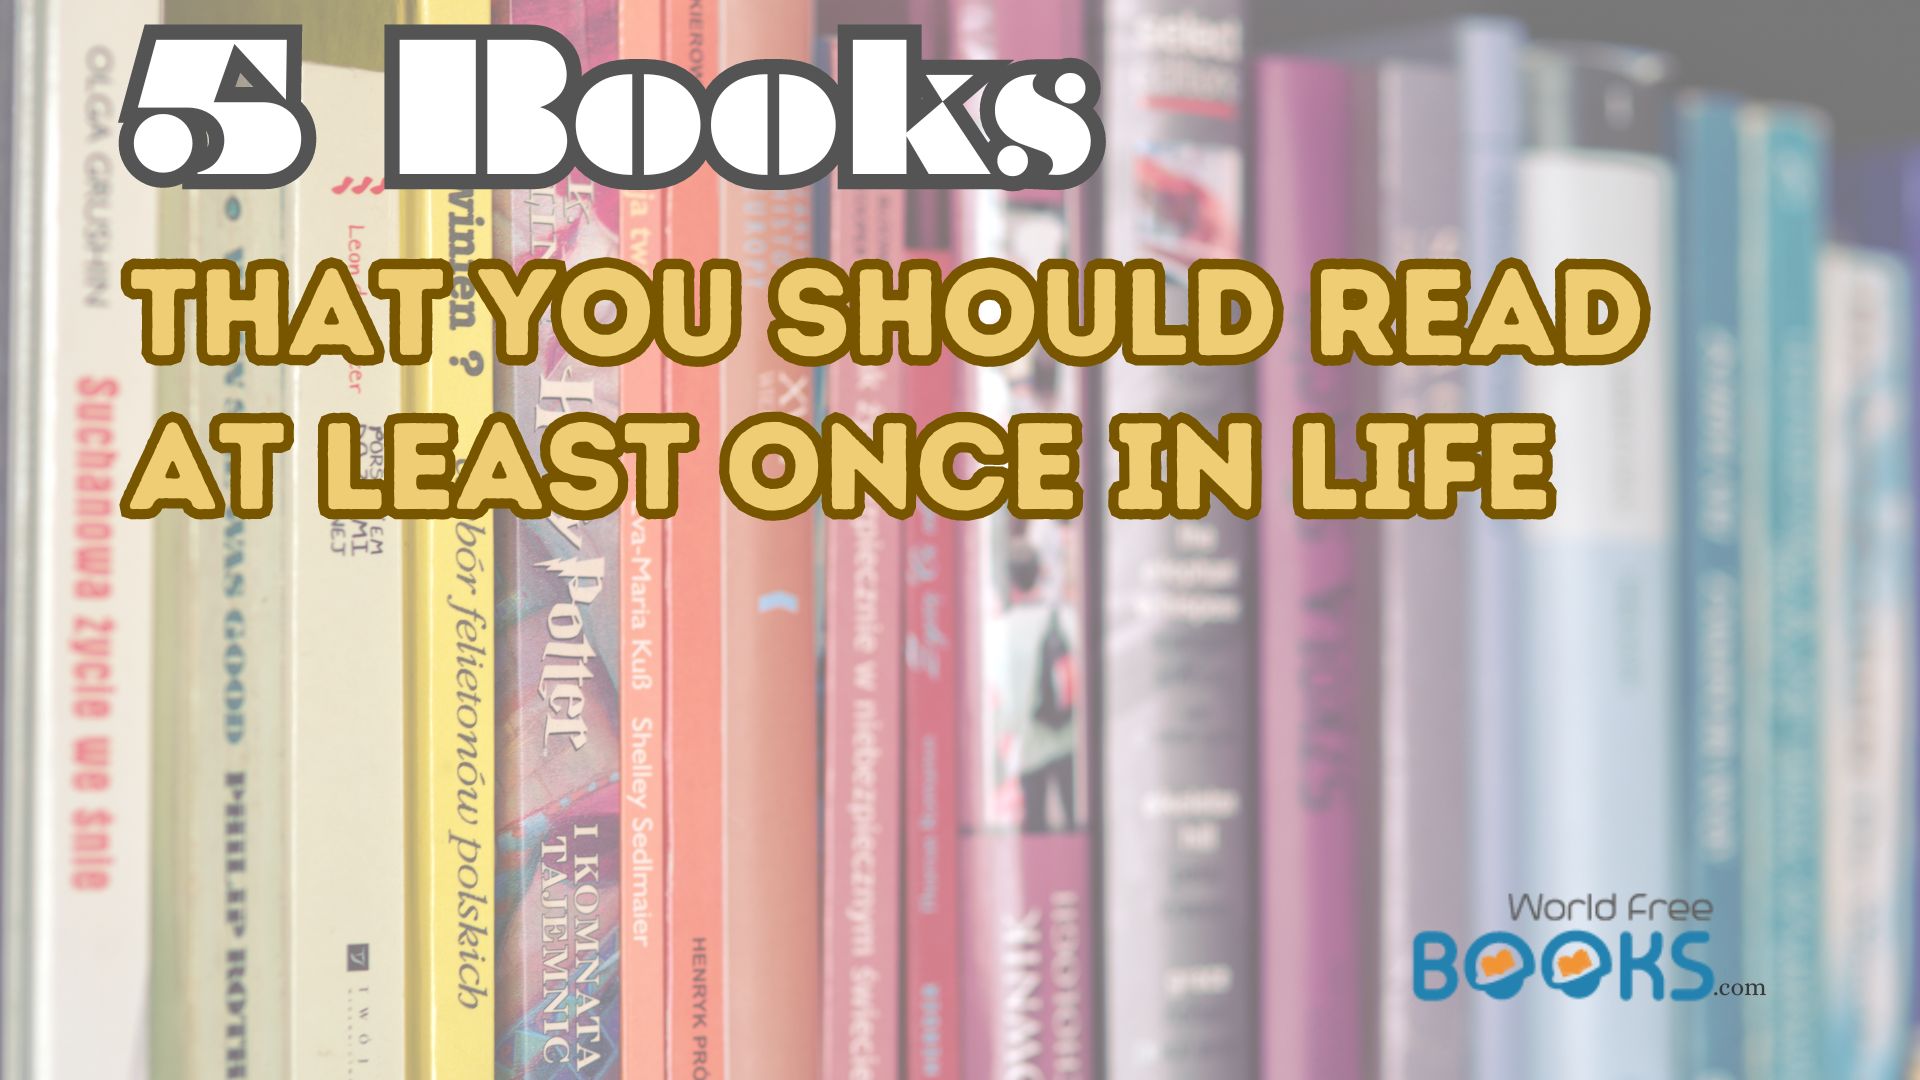 5 Books That You Should Read At Least Once In Life